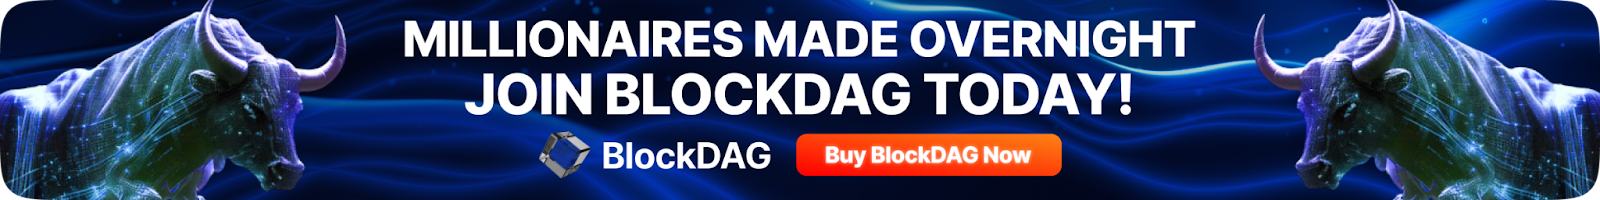 BlockDAG Surges Ahead 850% Price Increase, Eclipsing Dogecoin and FLR Market Movements With $38.3 Million Presale